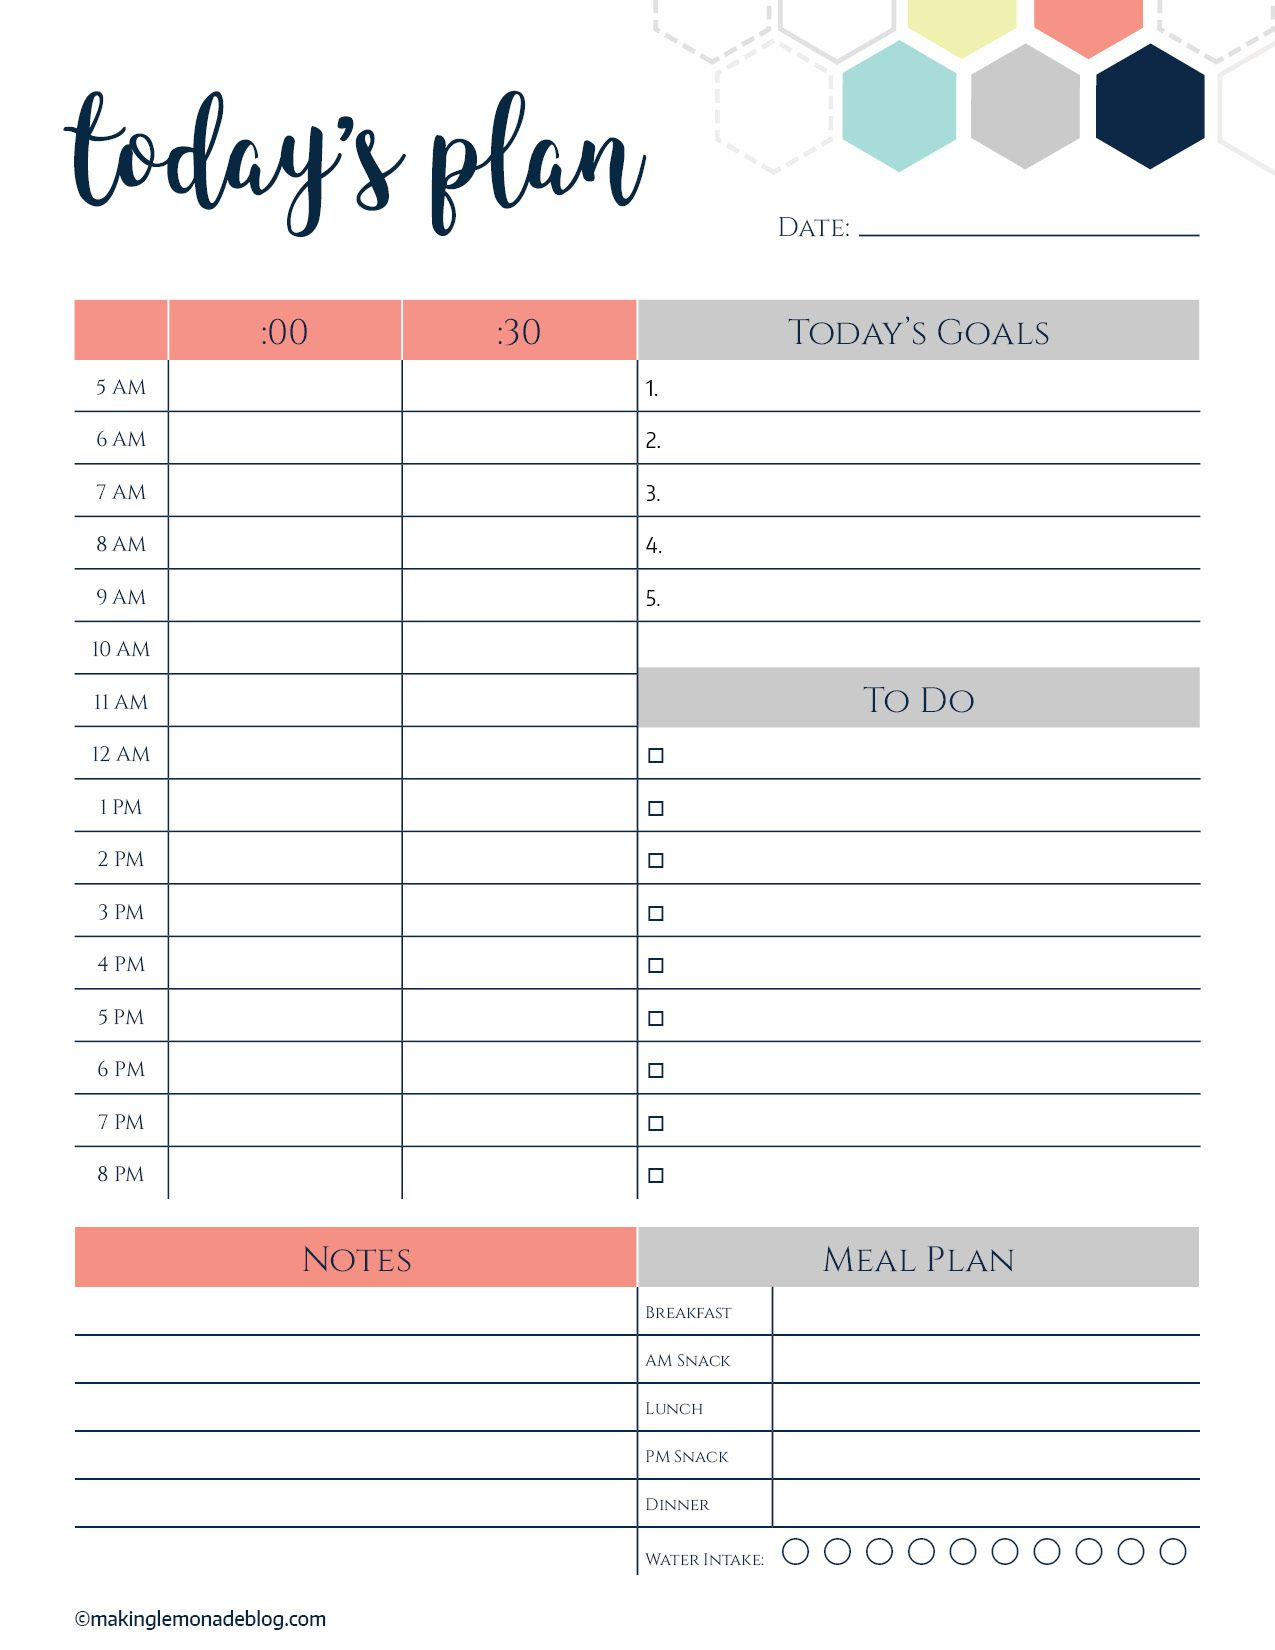 do planners manage guest lists